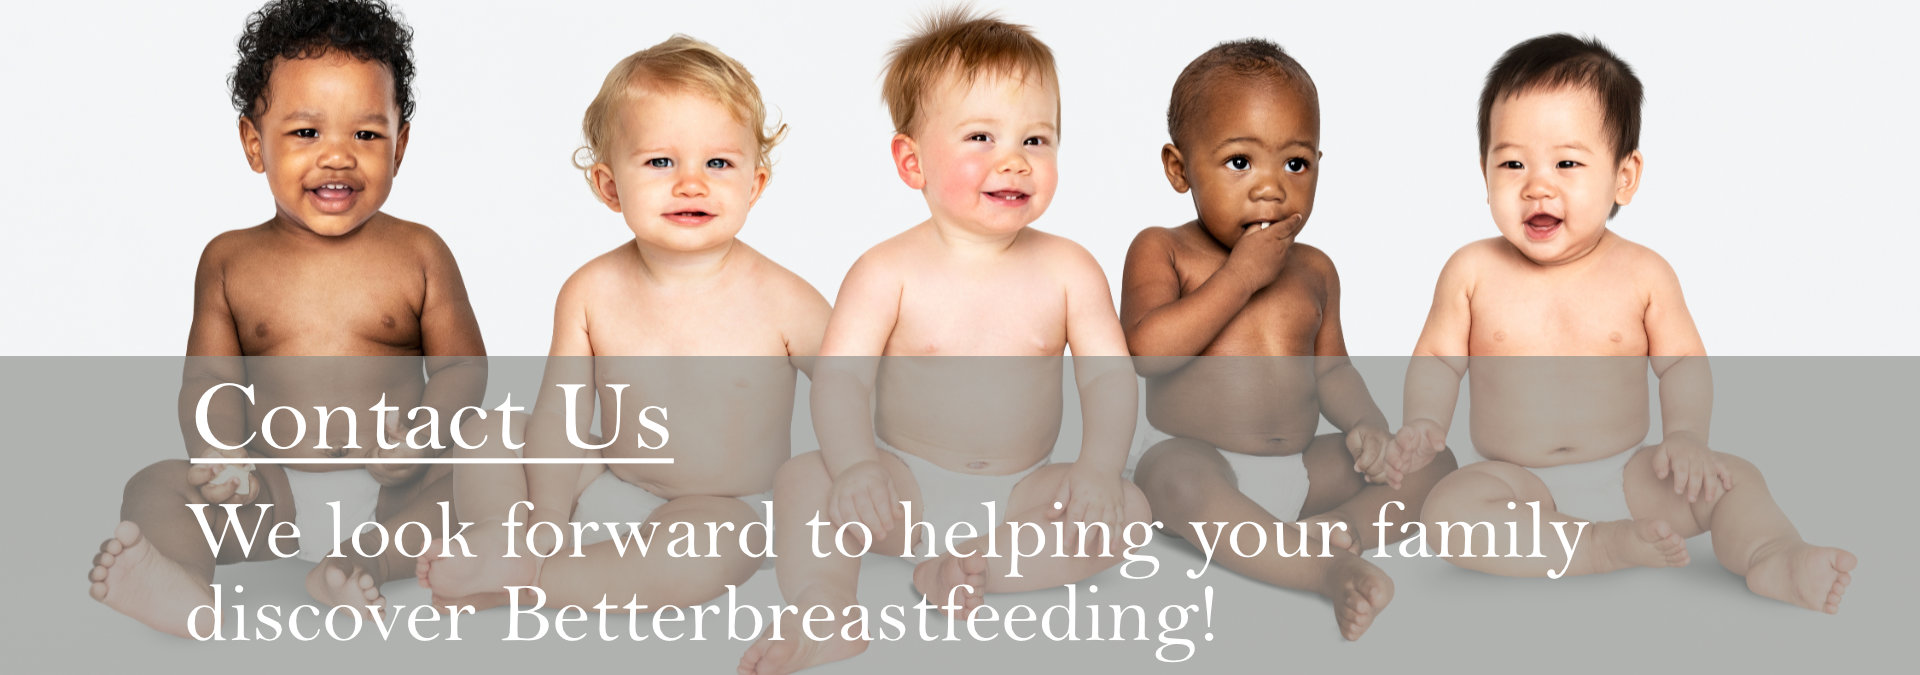 Contact Dr. Leah Roth / Better Breastfeeding Clinic Toronto